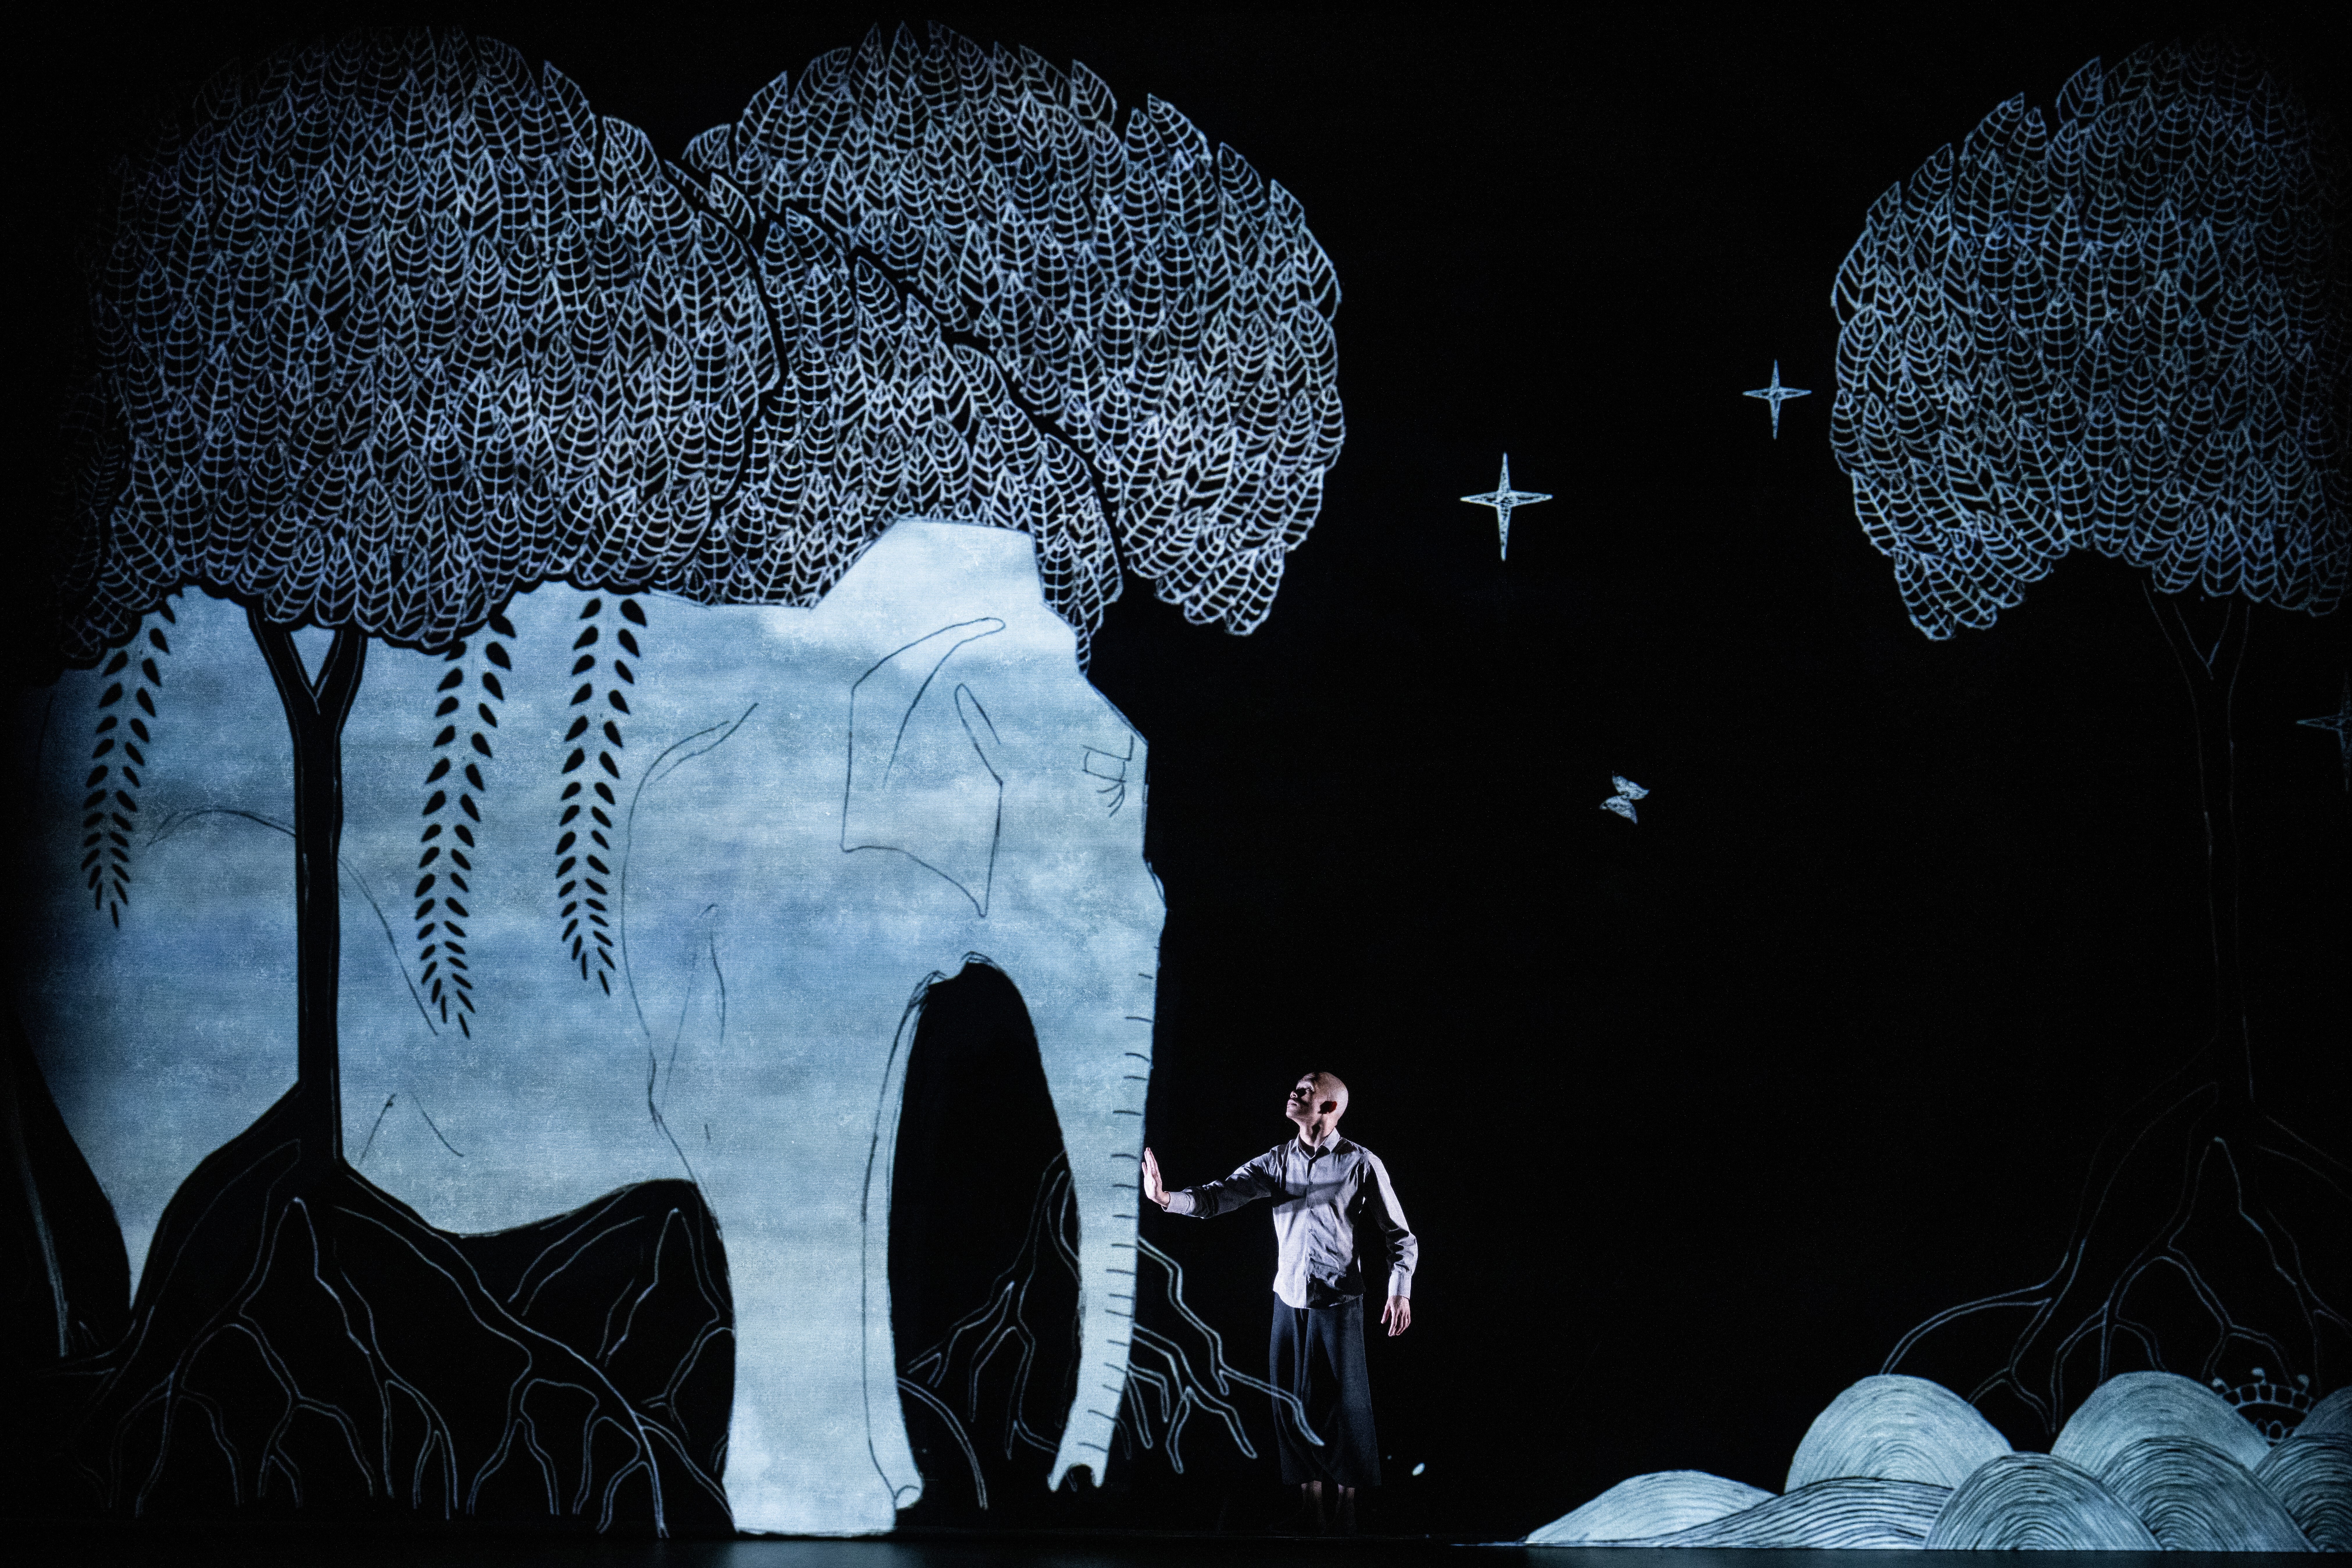 A dark background with stars. White trees and a large white elephant can be seen with a man stroking the elephants trunk, looking up towards it.